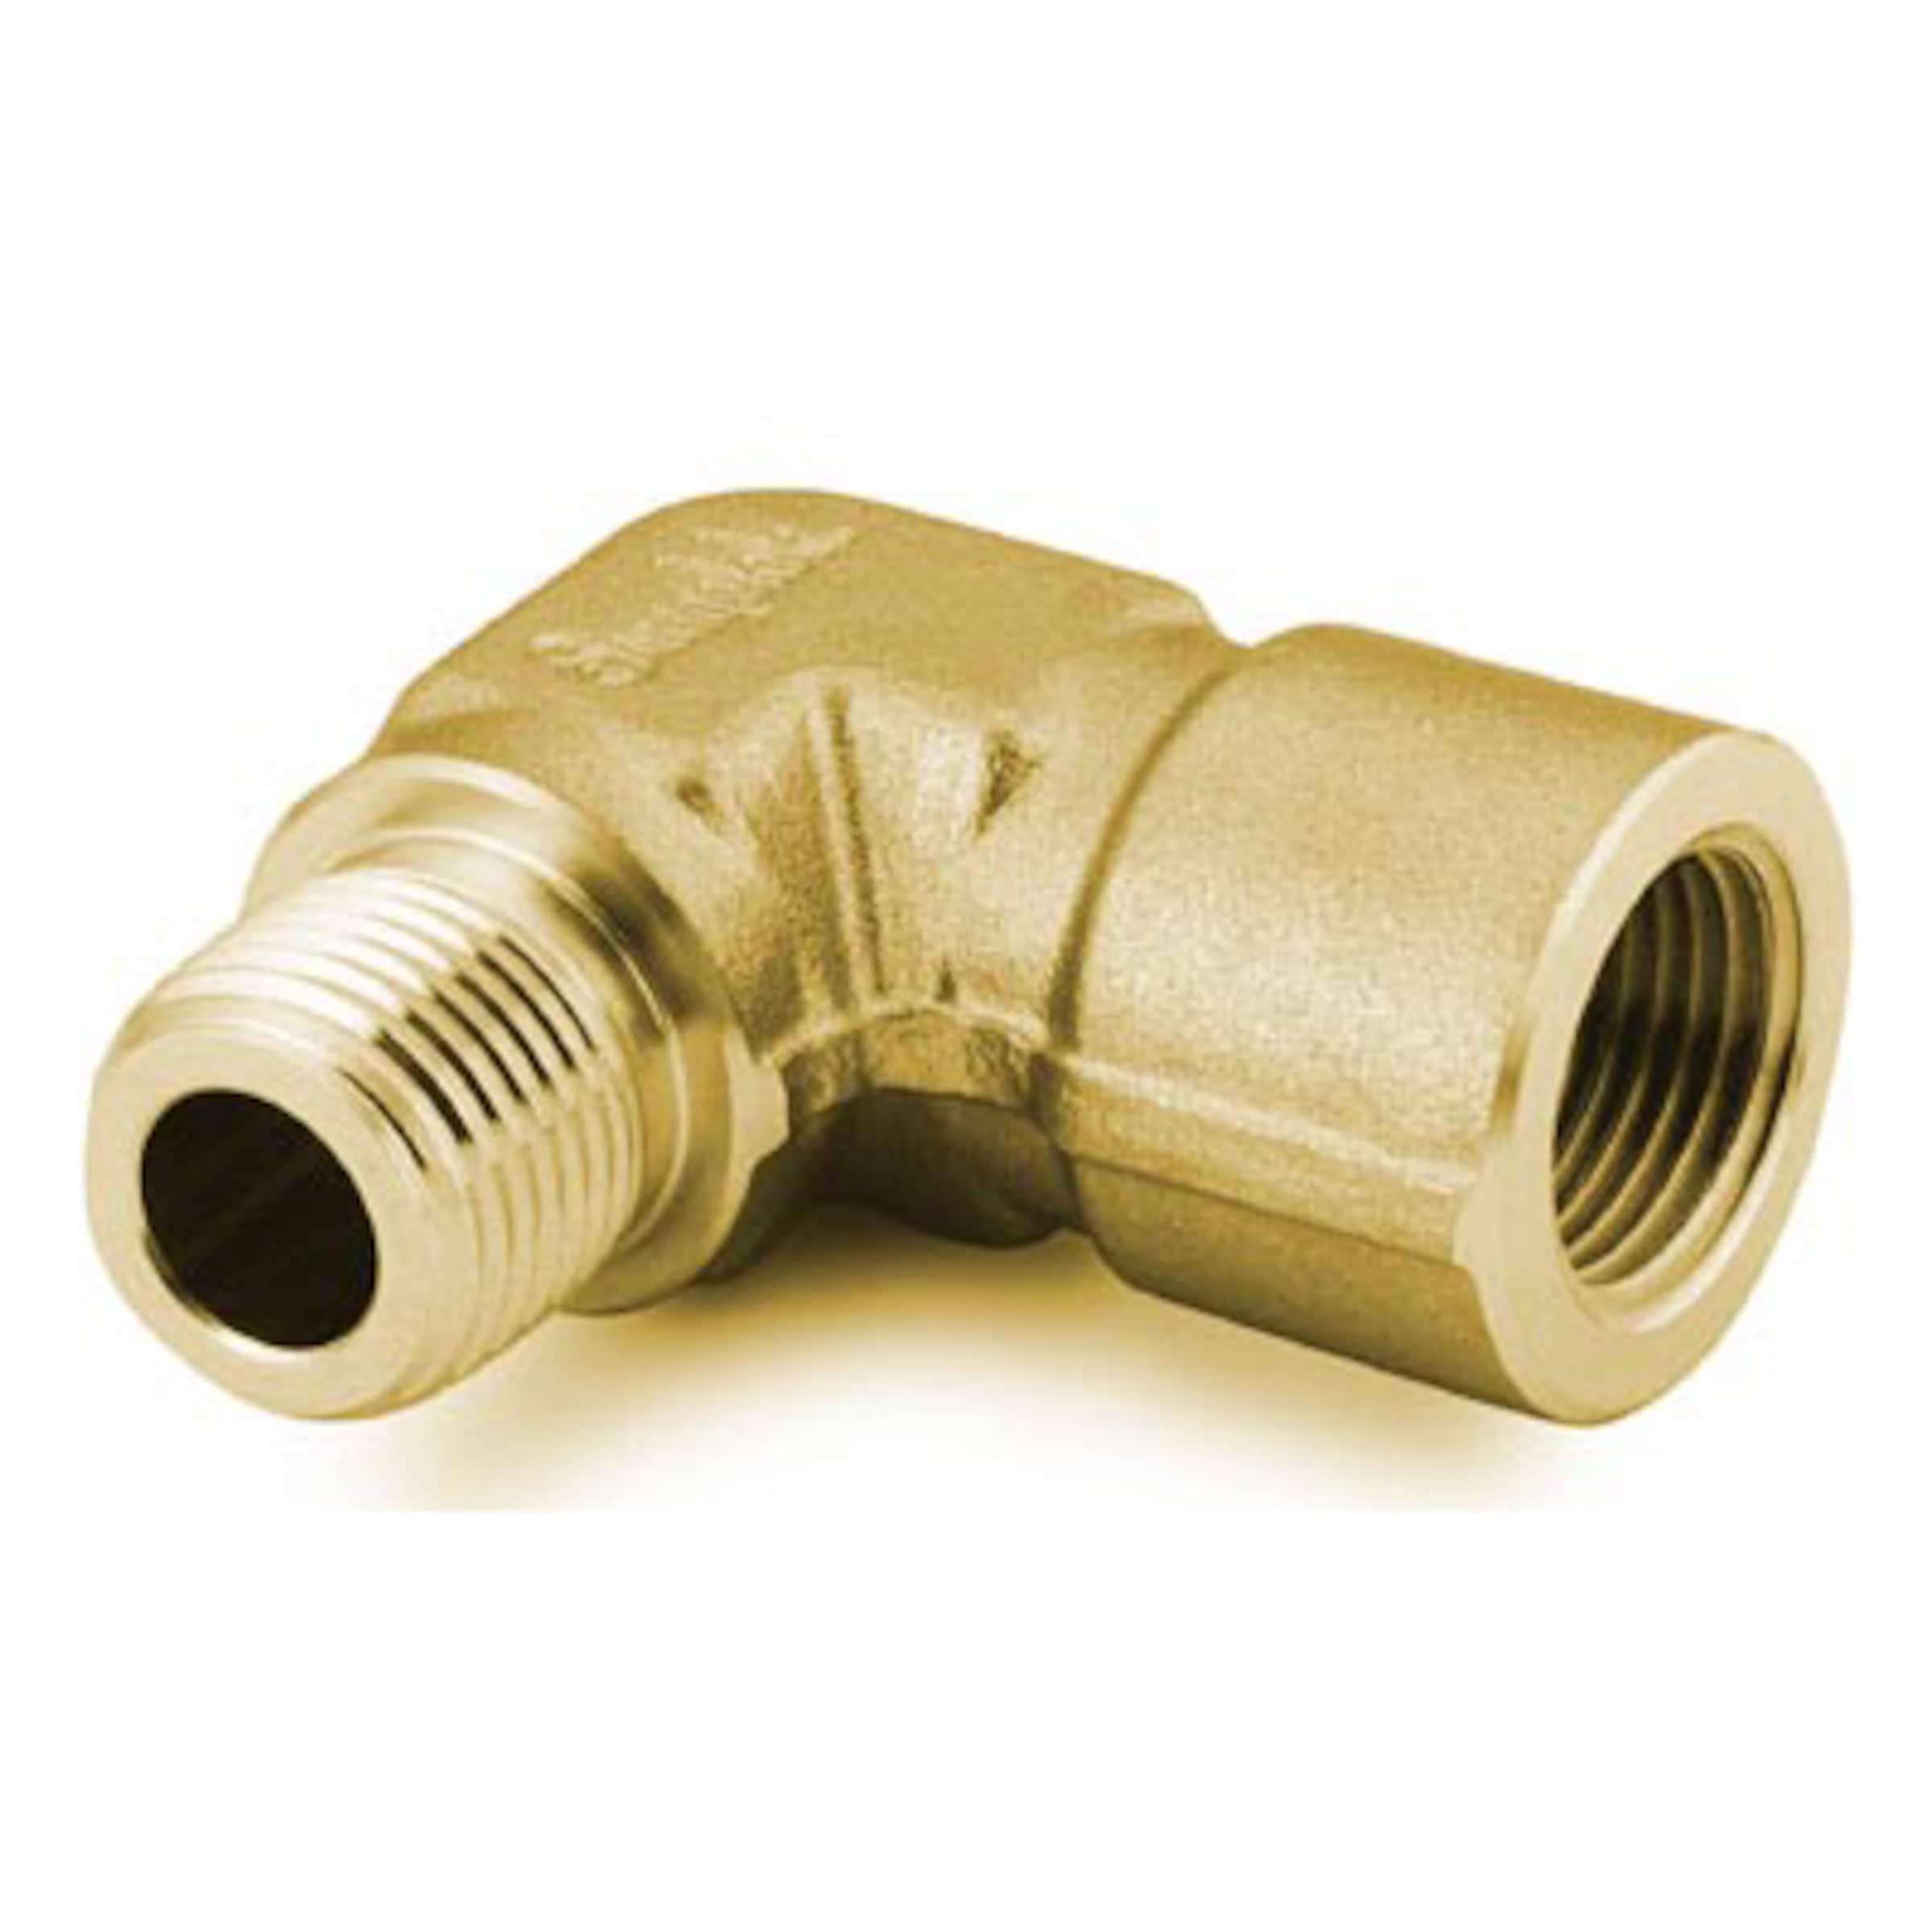 Reducer Pipe Adapter 1/4 Female Npt to 1/8 Male Npt Brass Fitting